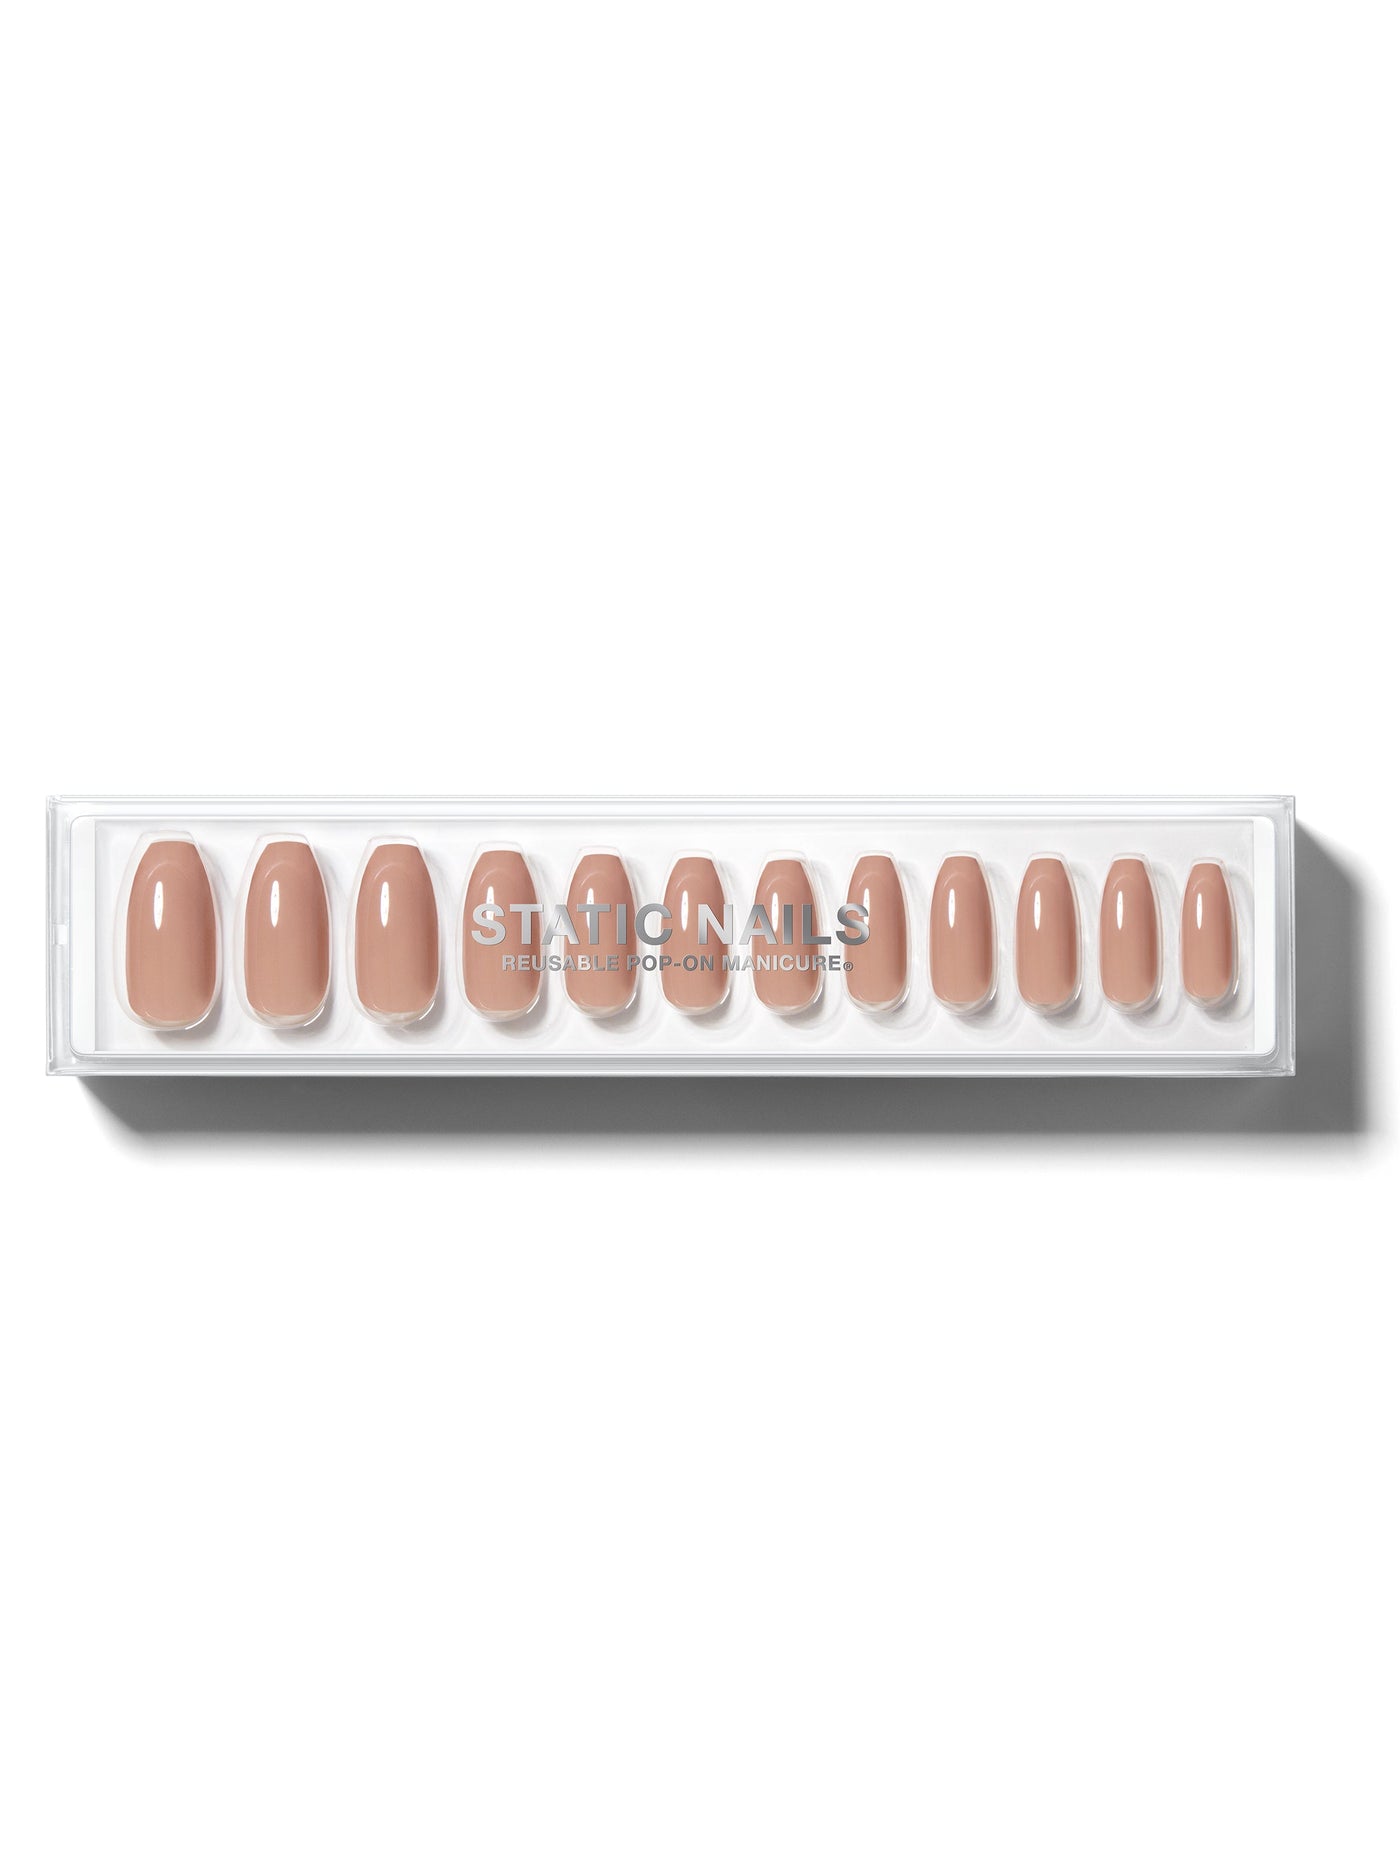 Toasted Sugar Long Coffin Award-Winning Reusable Pop-On Manicures ...